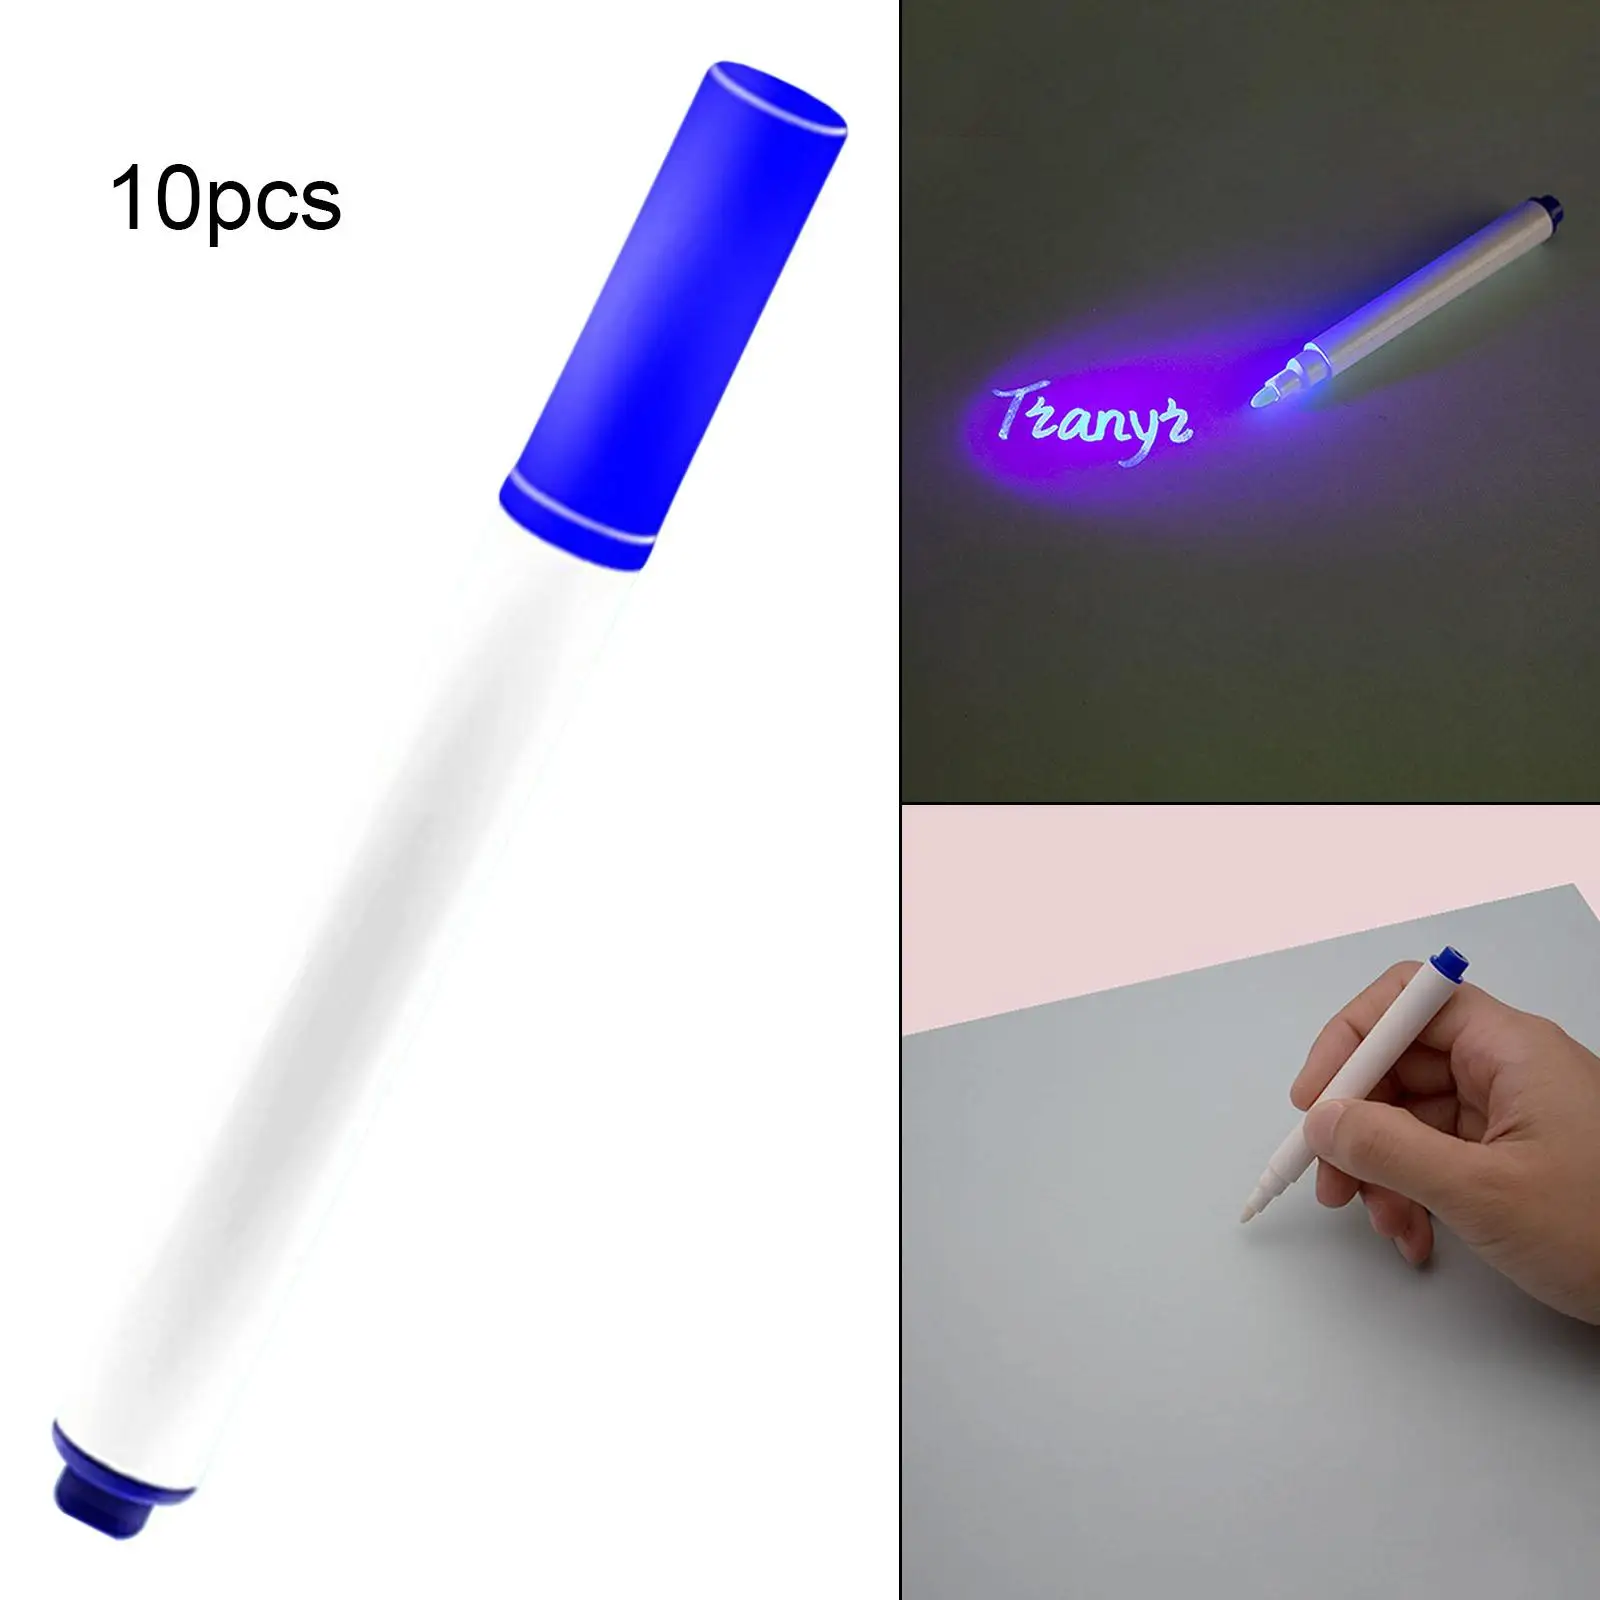 10Pcs Invisible Ink Pen Marker Pens 0.5cm Round Tip Drawing Painting for Graffiti Birthday Notes Halloween Message